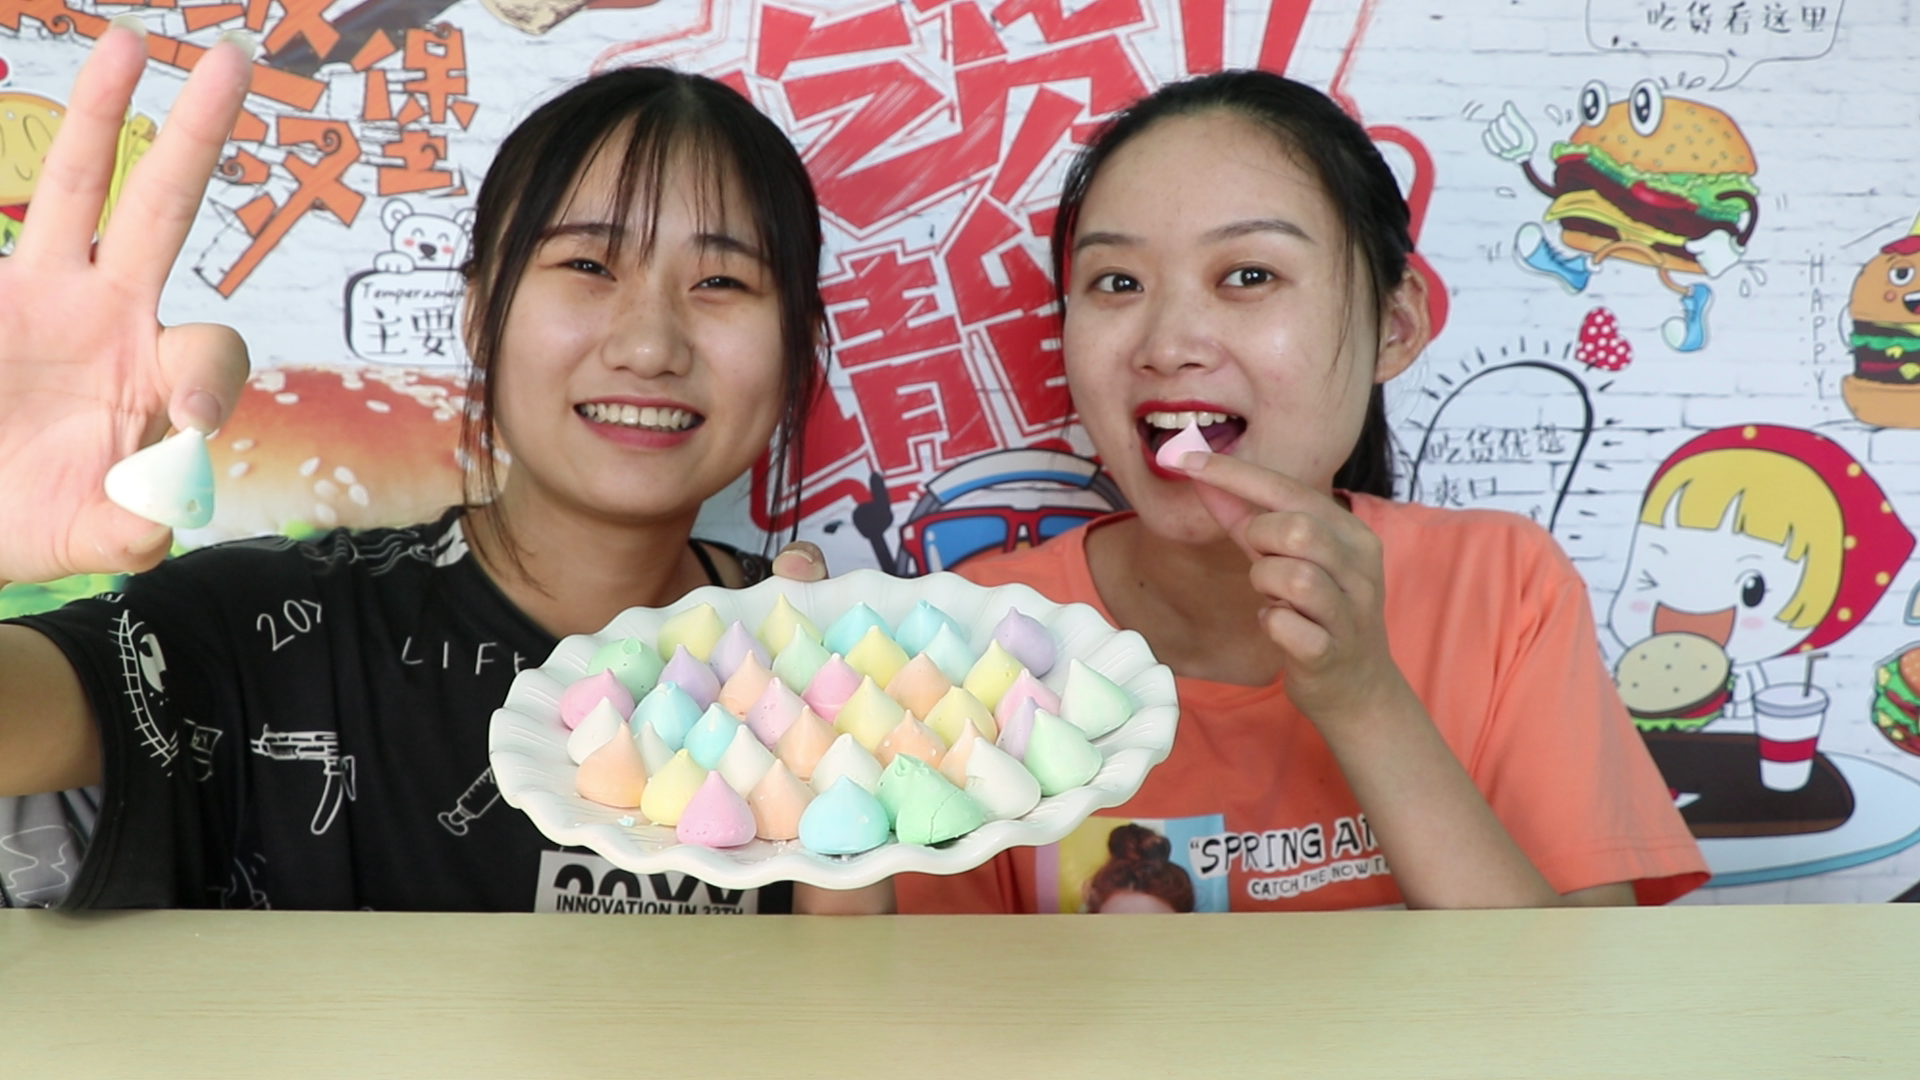 They ate "protein crispy candy" with fresh colors like onions and crisp and delicious taste.